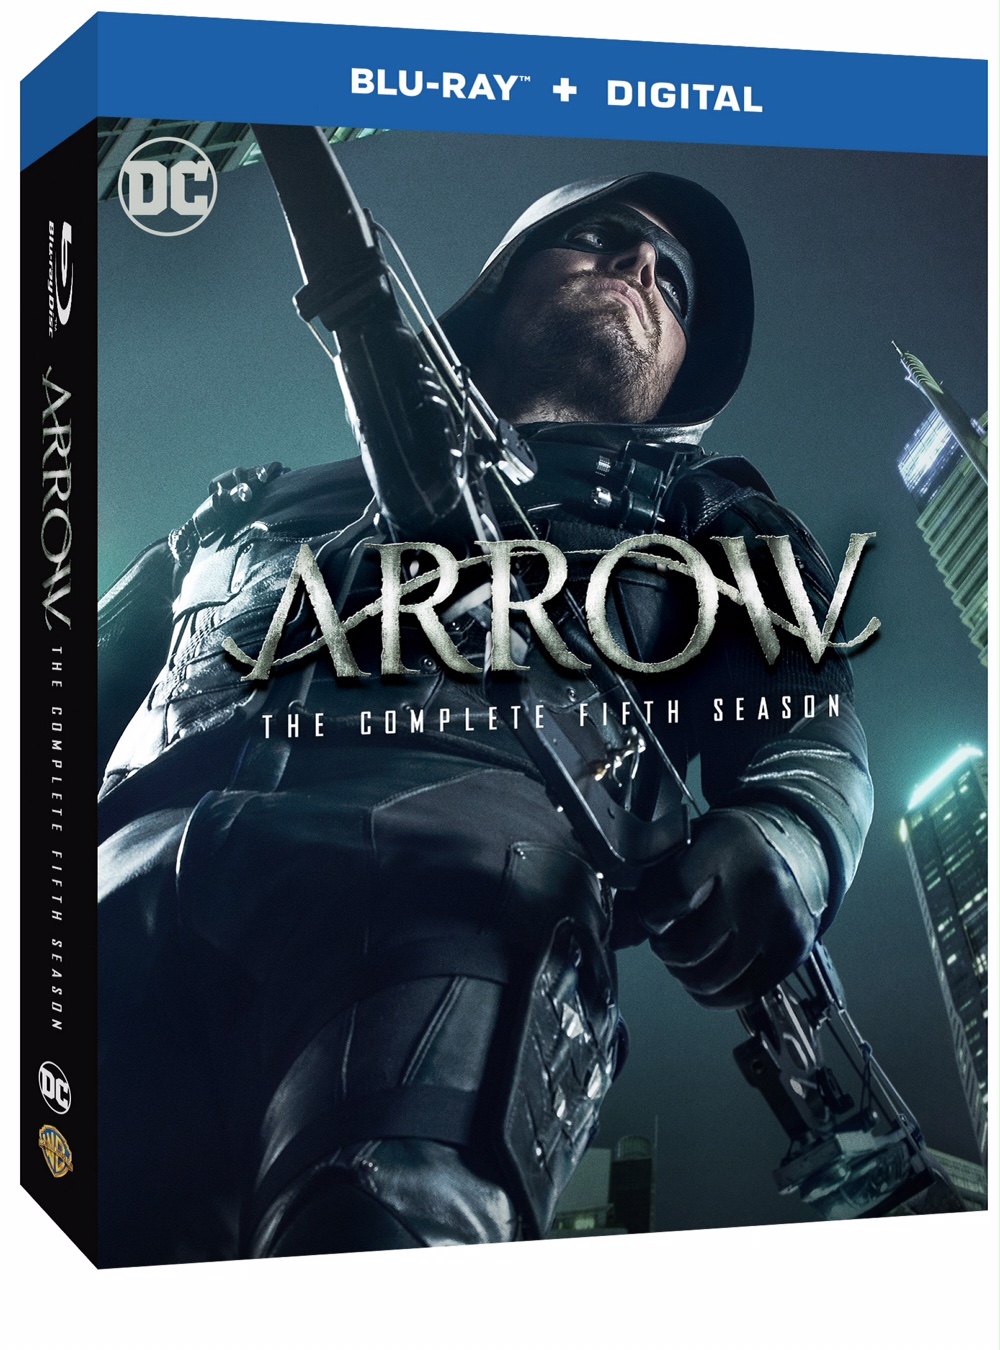 Arrow Season 5 Coming to Bly-ray and DVD